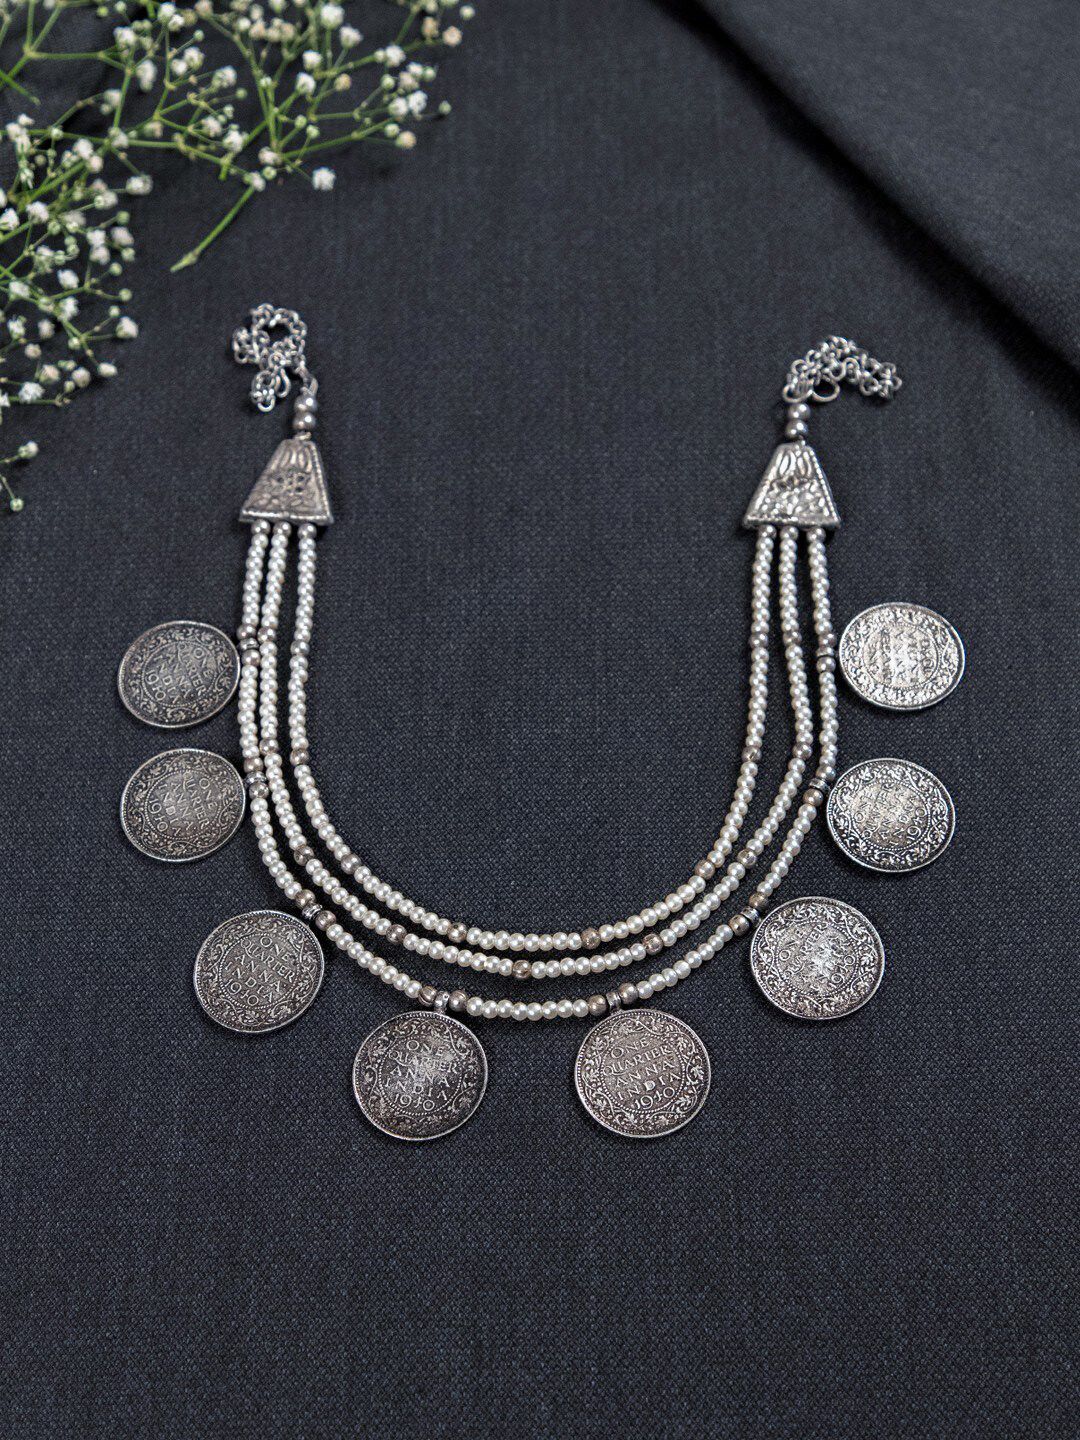 creyons by mansi Silver-Toned & White Beaded Coin Necklace Price in India